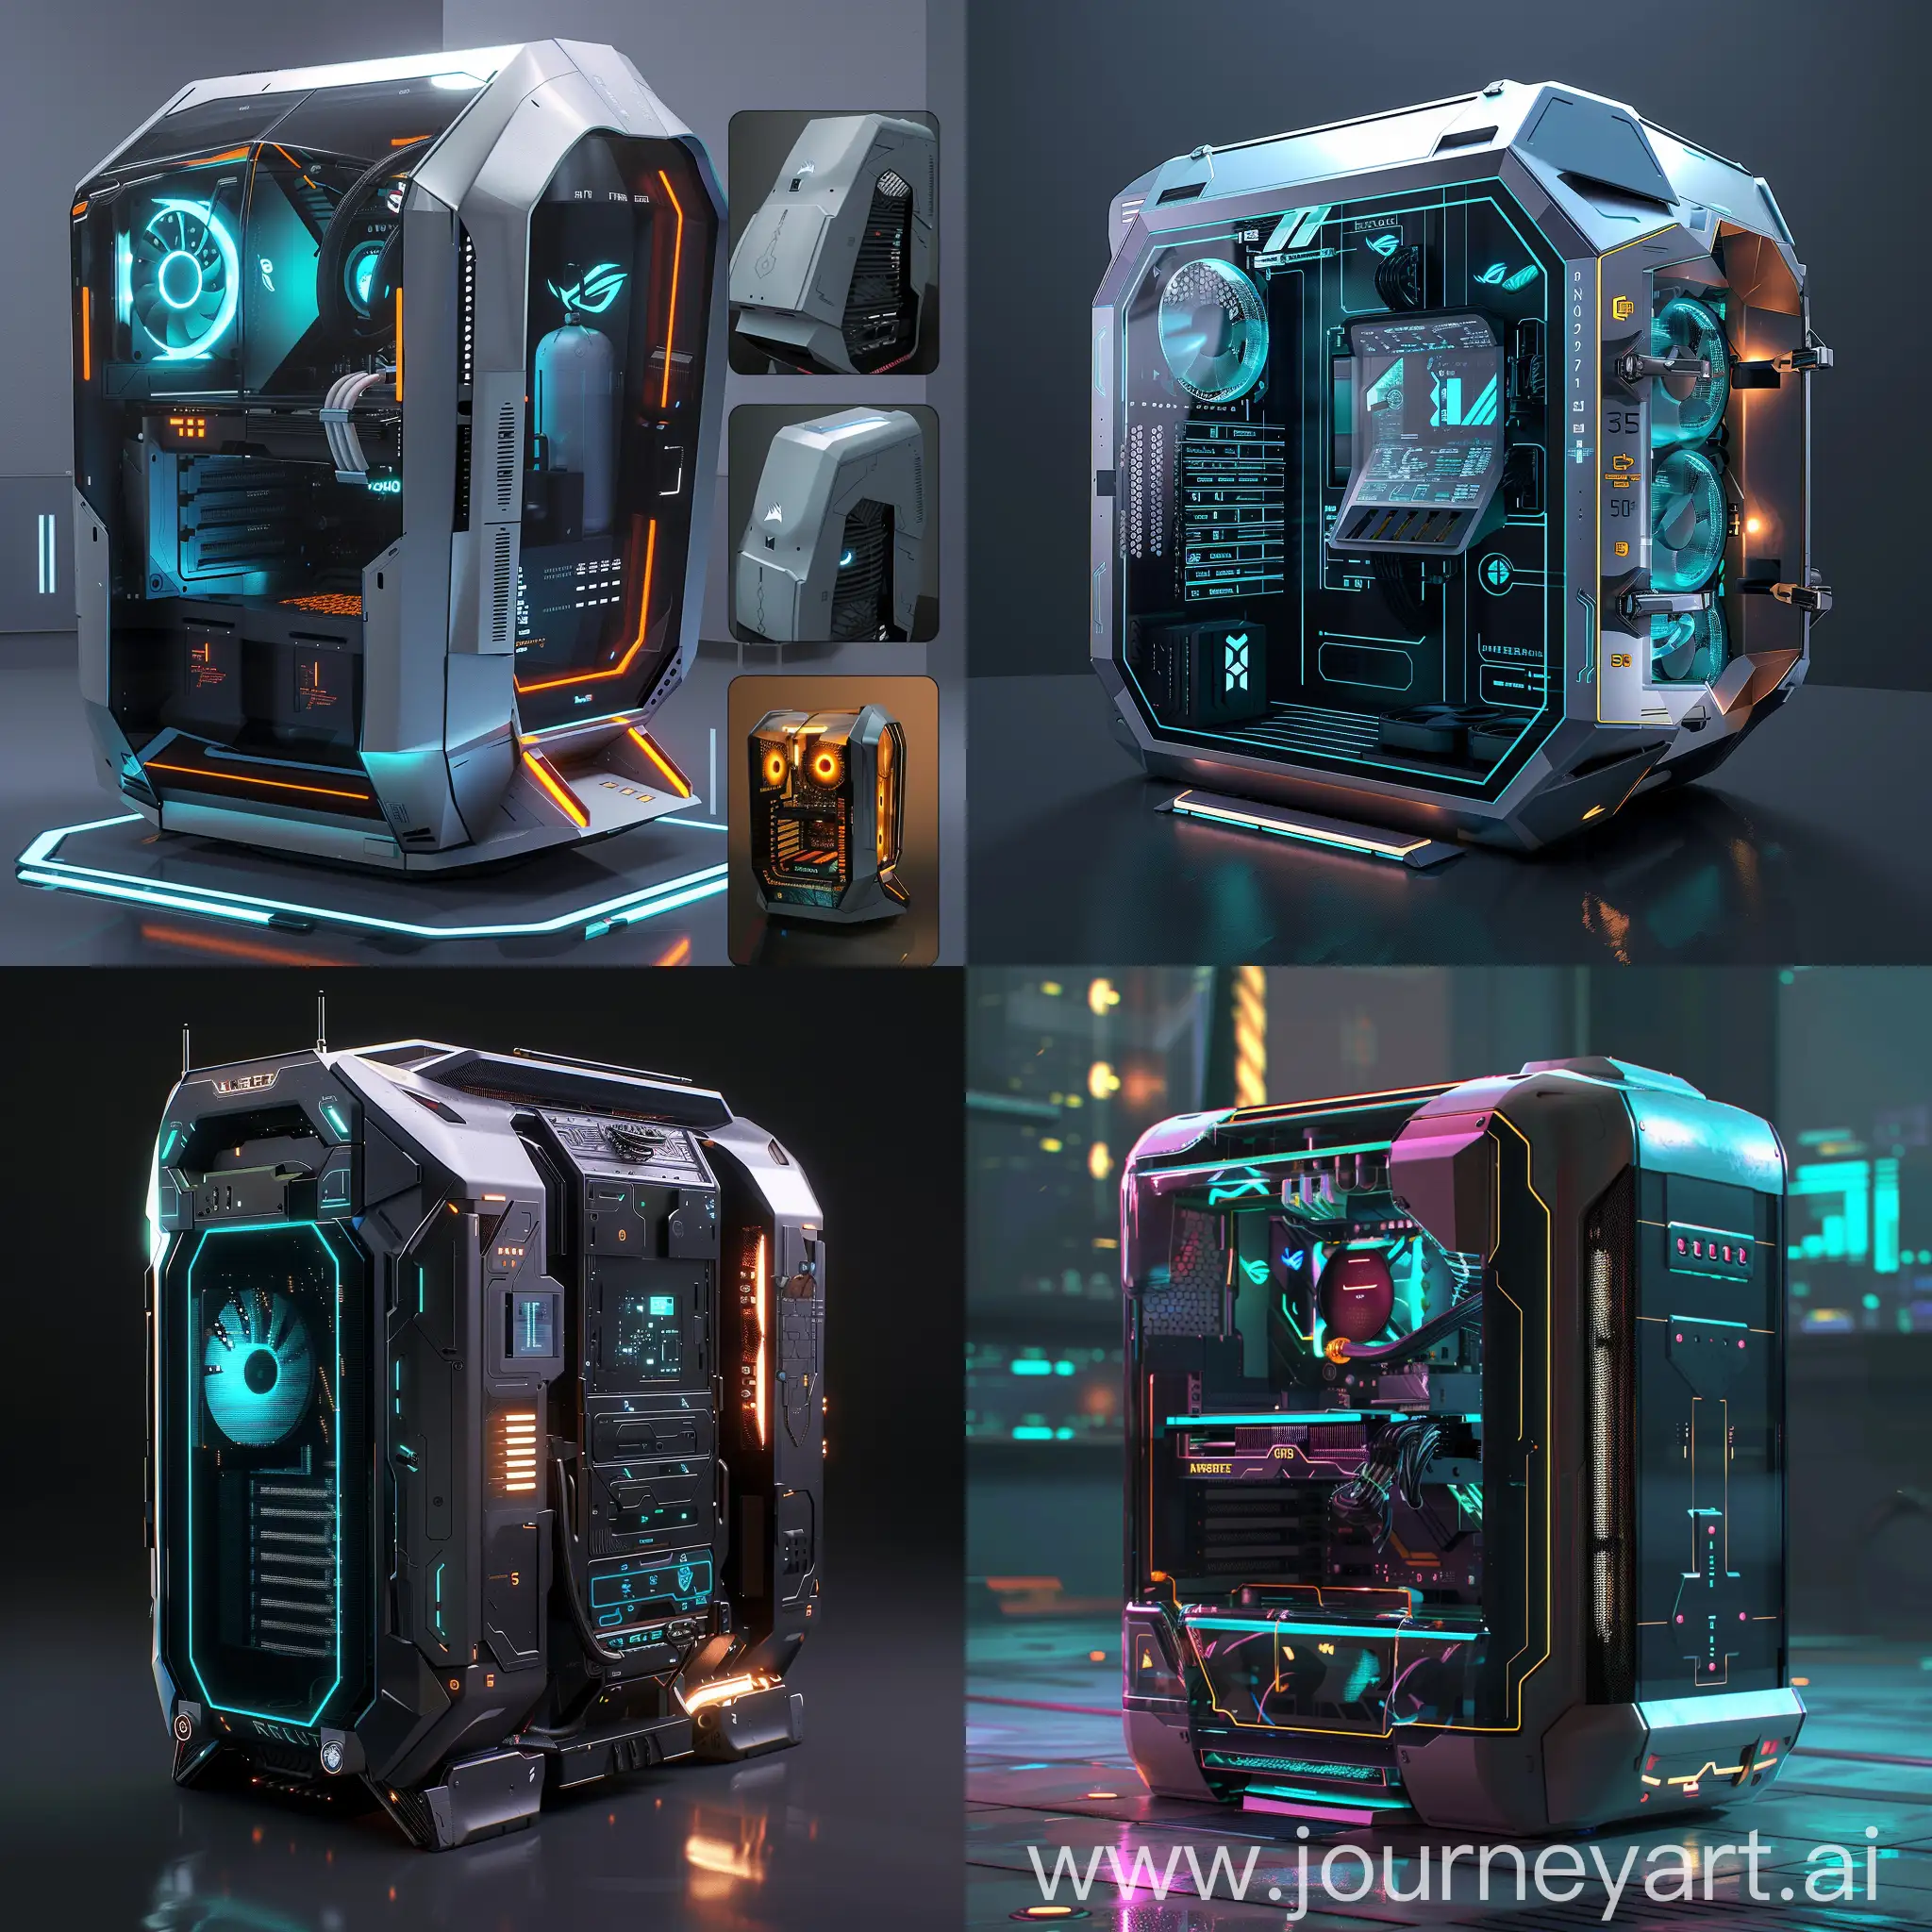 Futuristic-PC-Case-with-Integrated-Liquid-Cooling-and-Holographic-Display